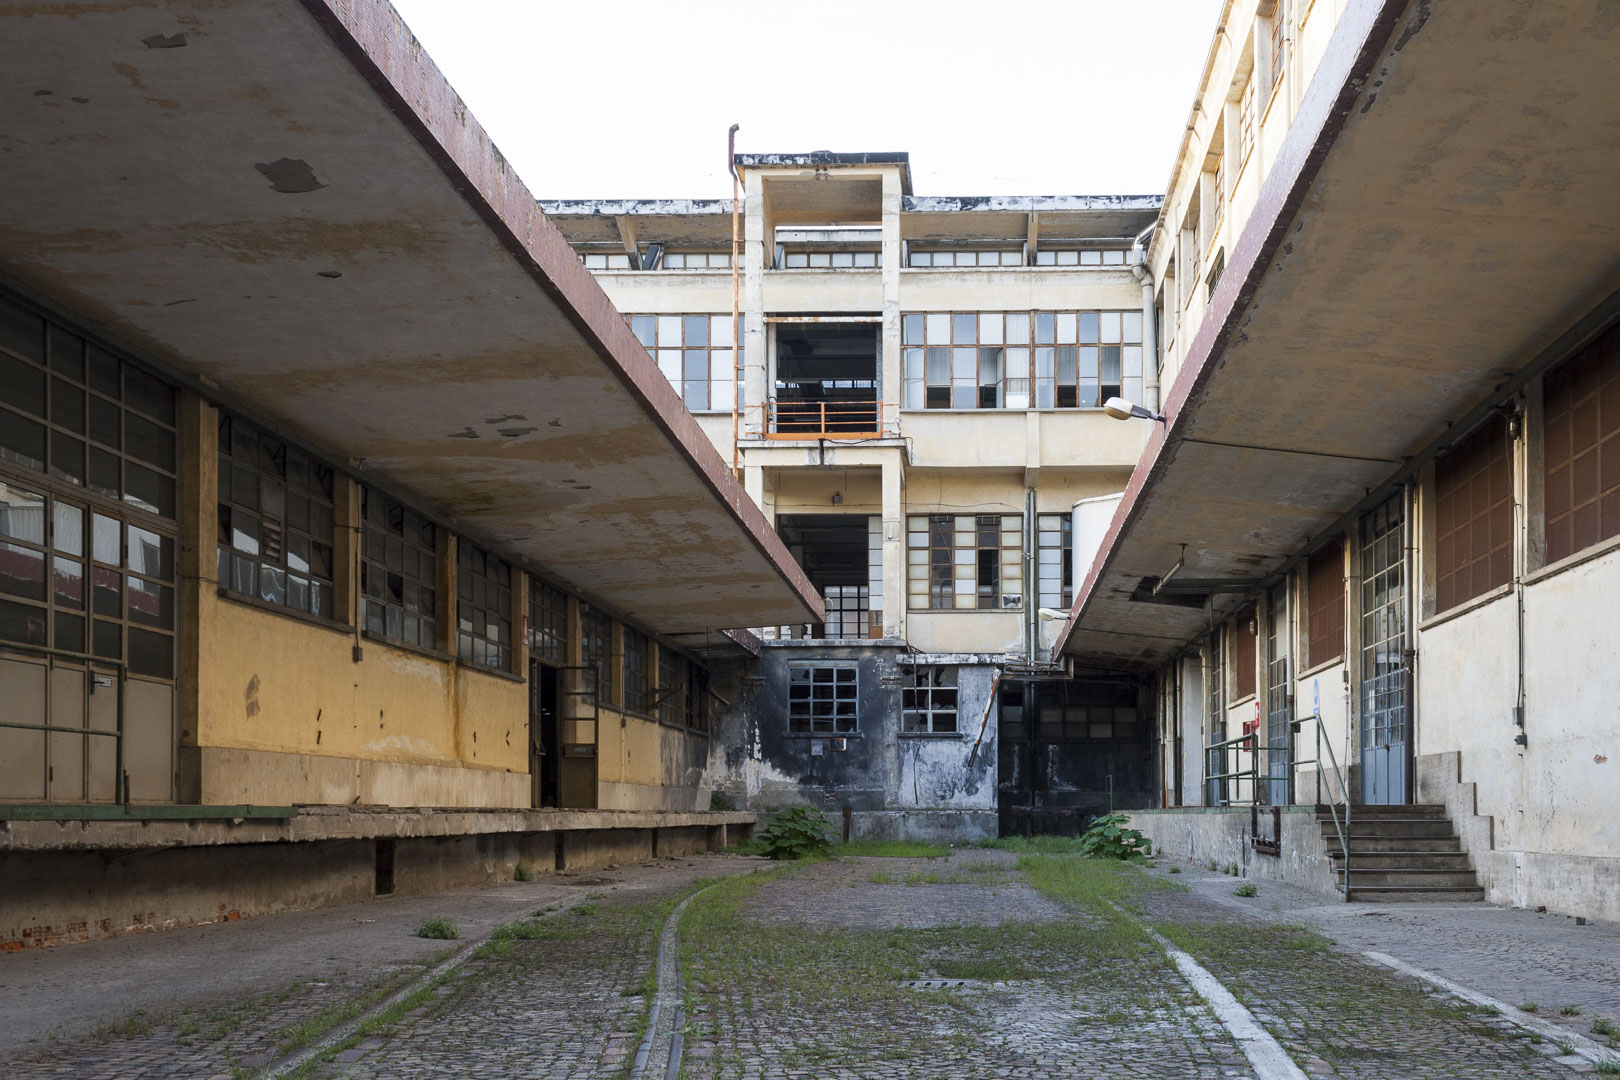 Abandoned Cigarette Factory – Turin, Italy